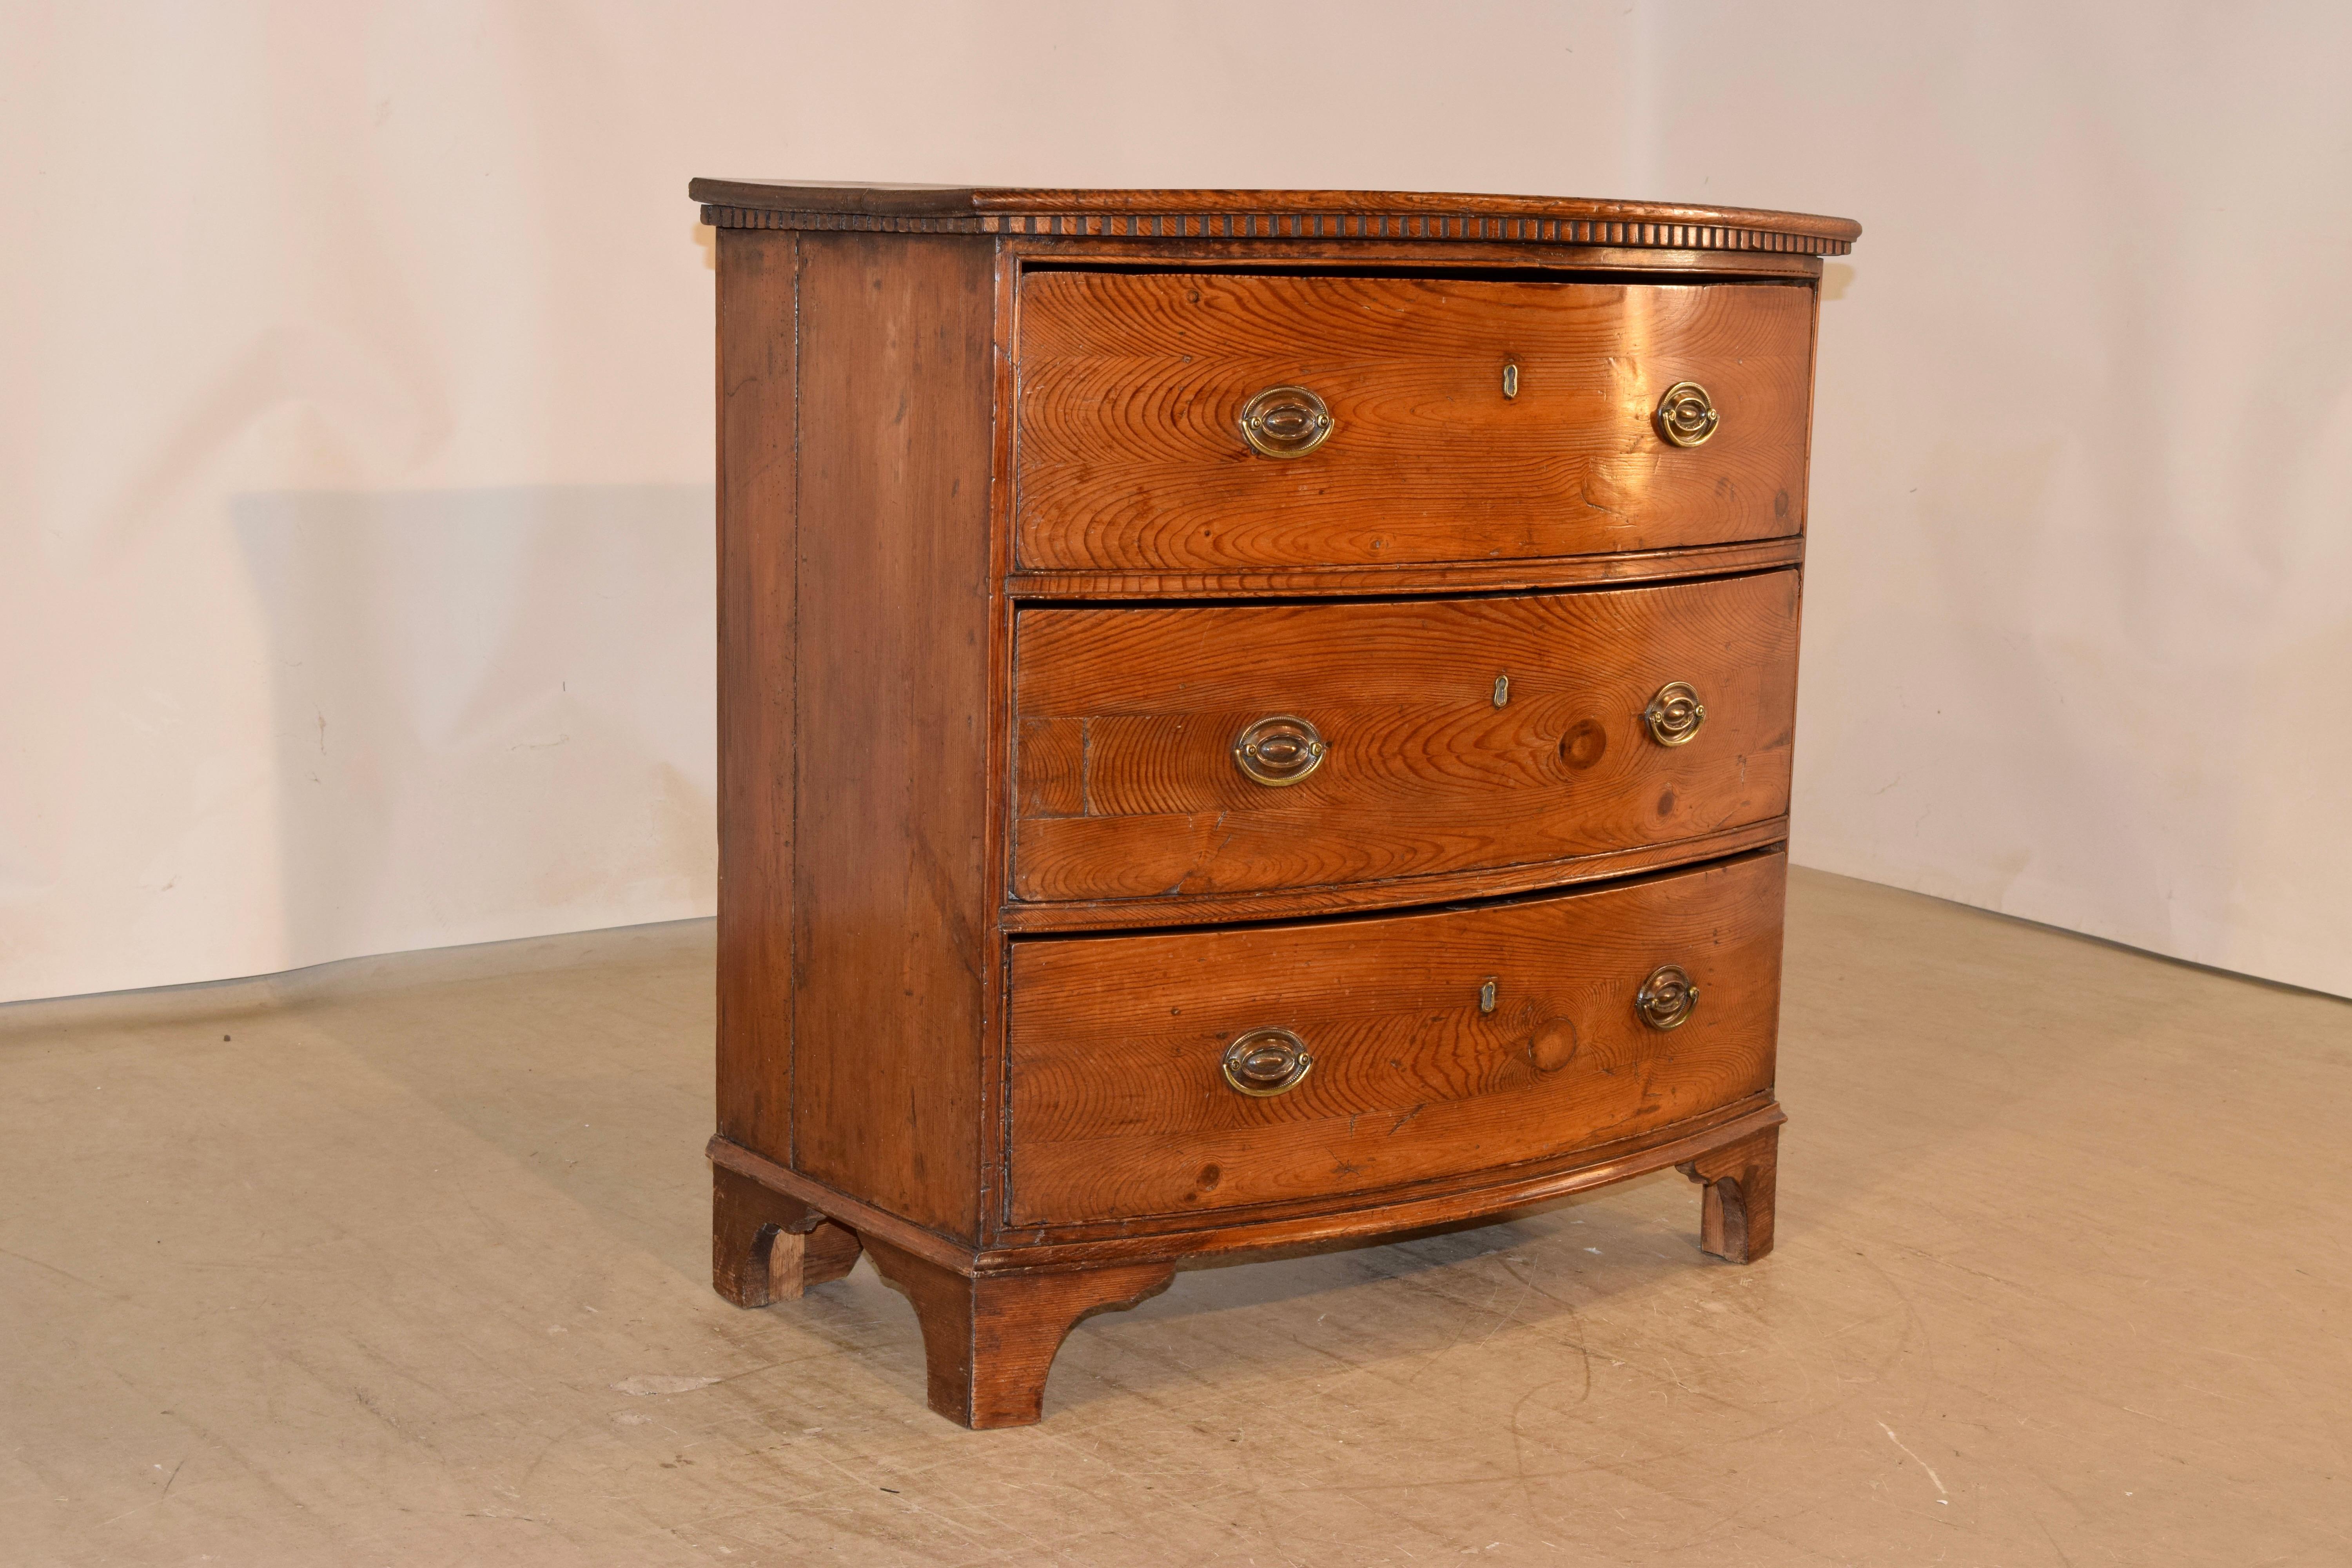 Wonderful and rare 18th century pitch pine bow front chest of drawers from England with a two plank top, which has a lovely dentil molding underneath the top edge and following down to simple sides and three drawers in the front. The case is